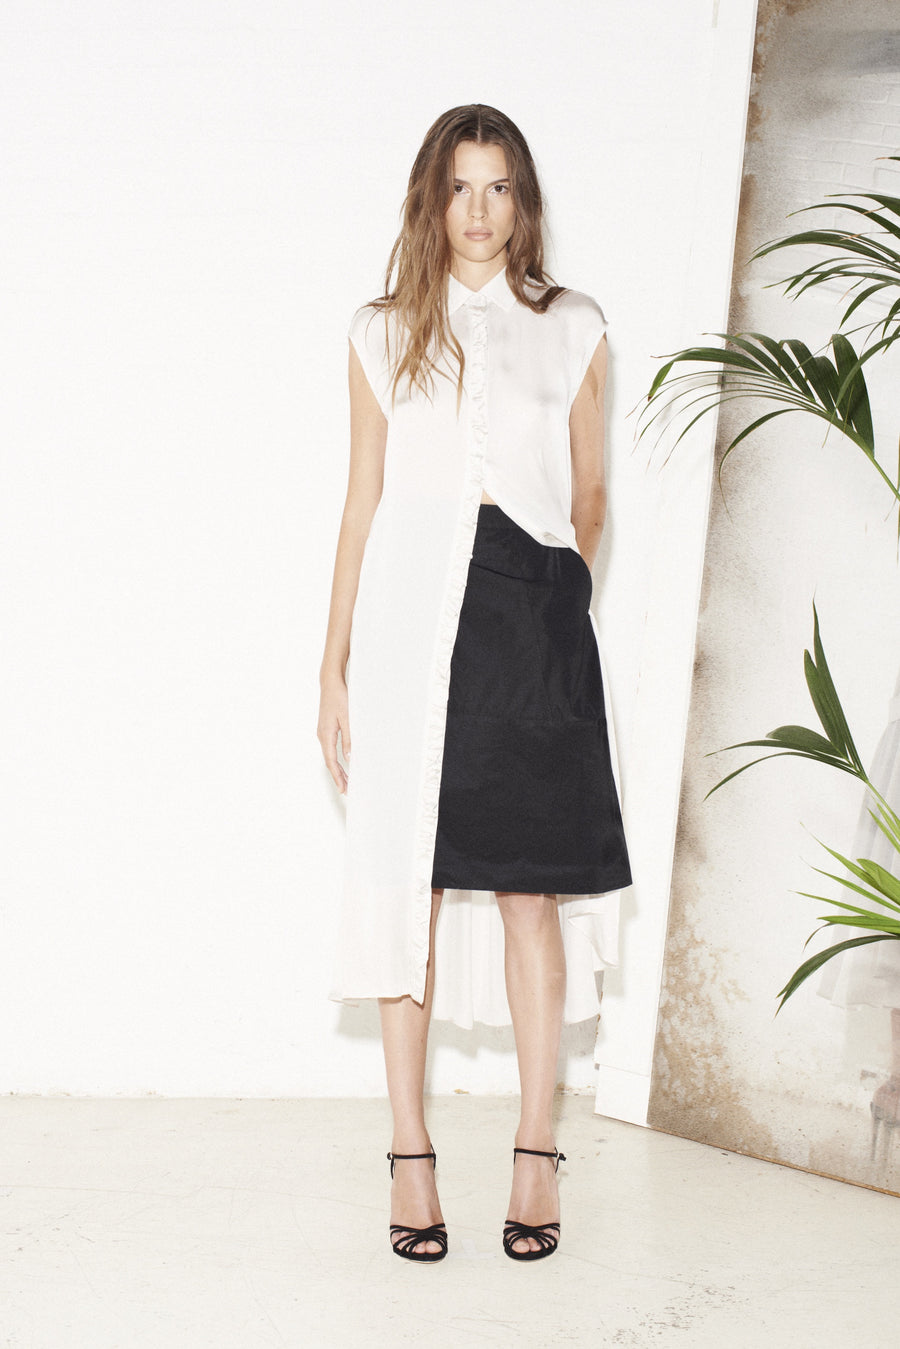 SS2013 / Look 7